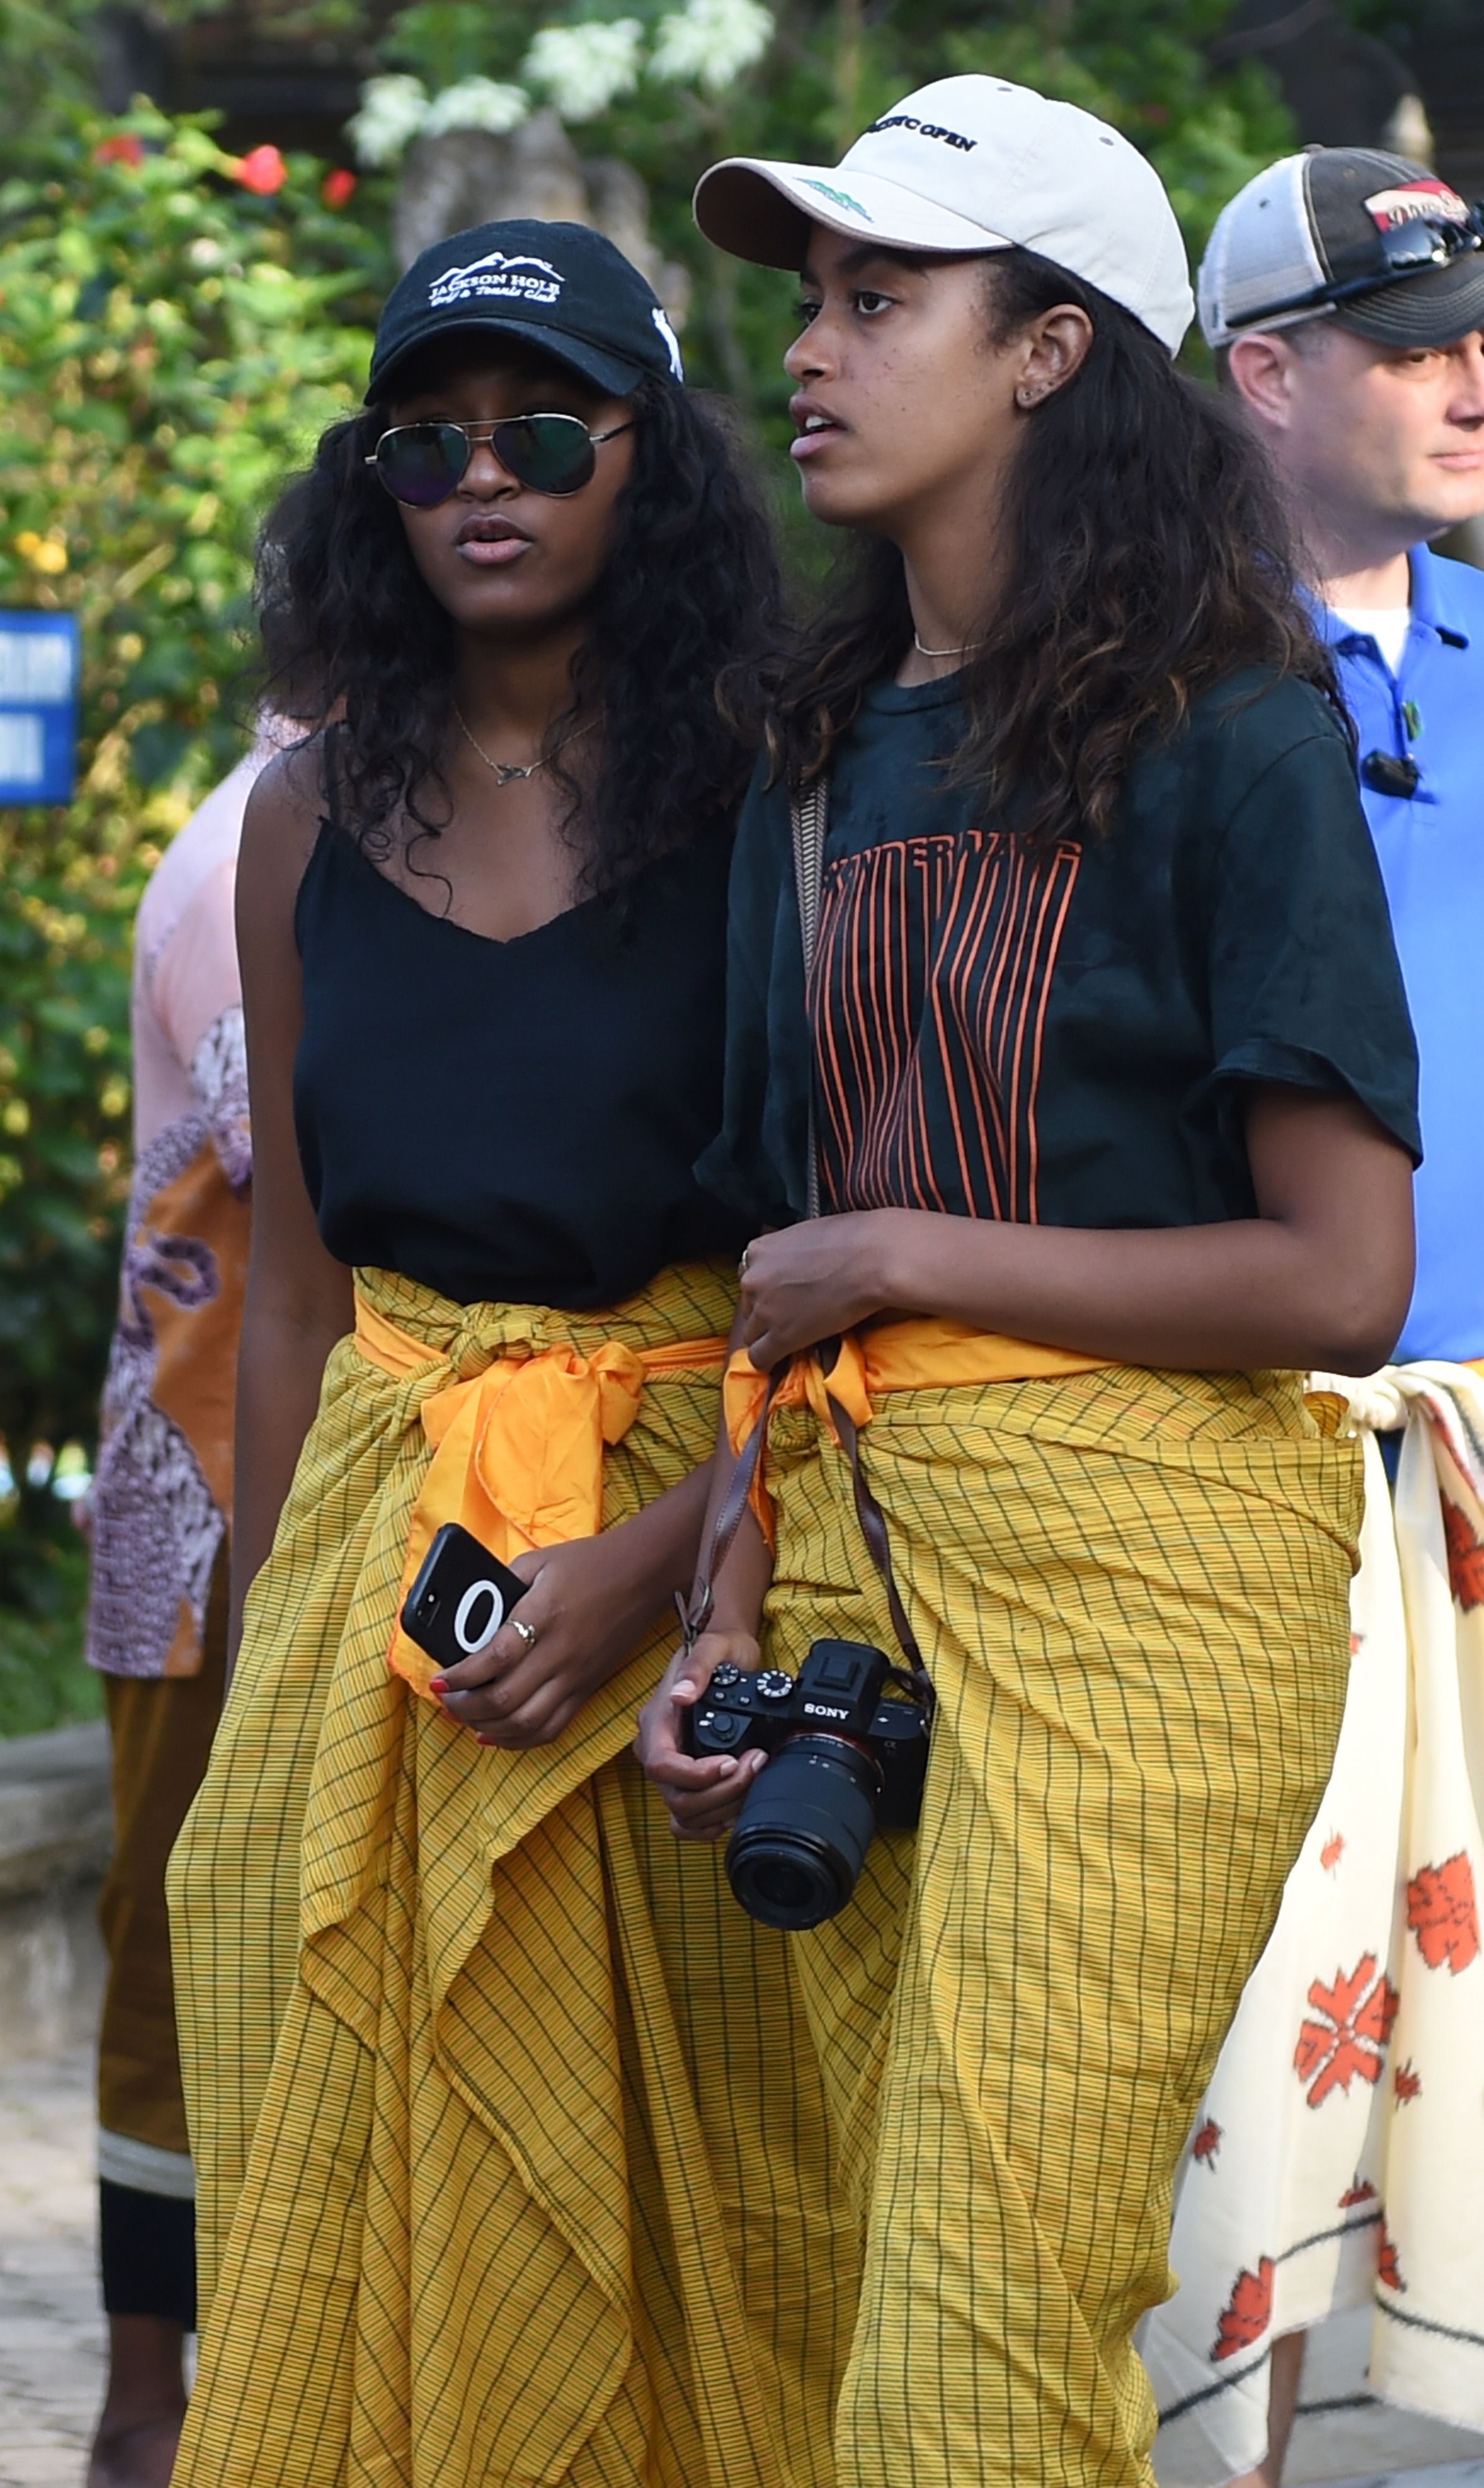 Sasha and Malia Obama spotted out during their visit to the Tirtha Empul temple at Tampaksiring Village in Gianyar in Bali, Indonesia on June 27, 2017 | Source: Getty Images